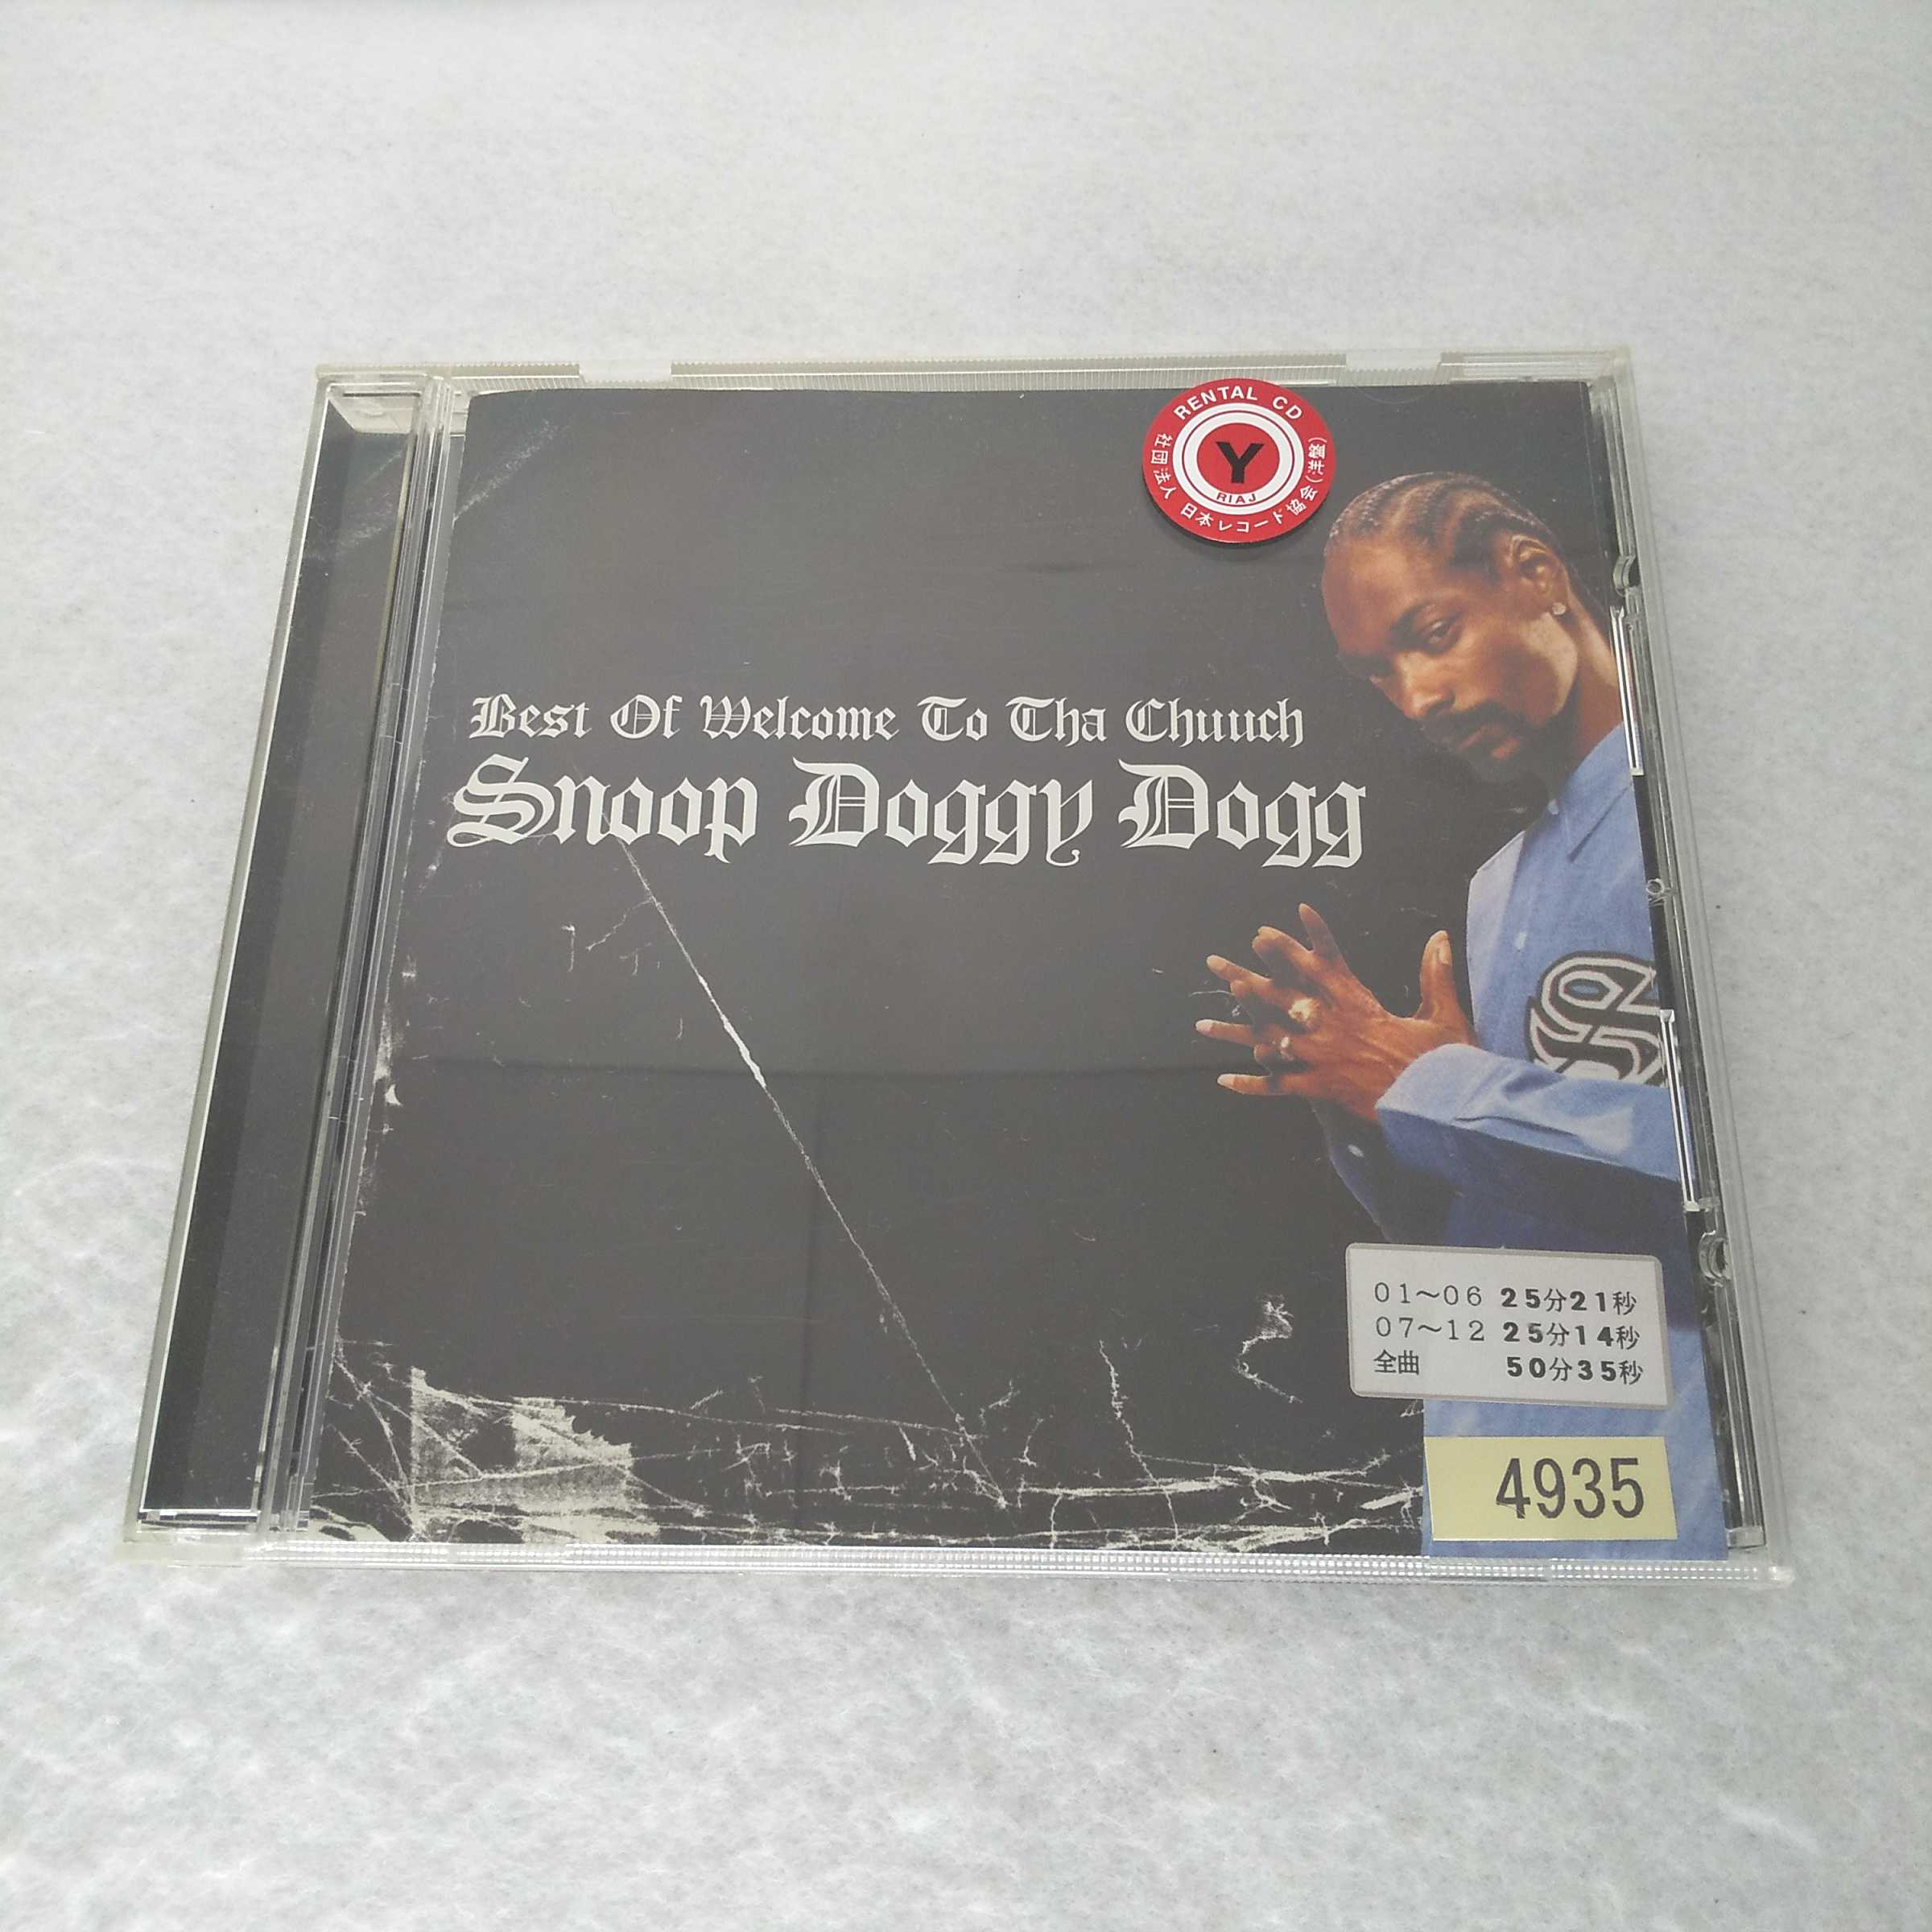 AC10195 yÁz yCDz Best Of Welcome To The Chuuch/Shoop Doggy Dogg